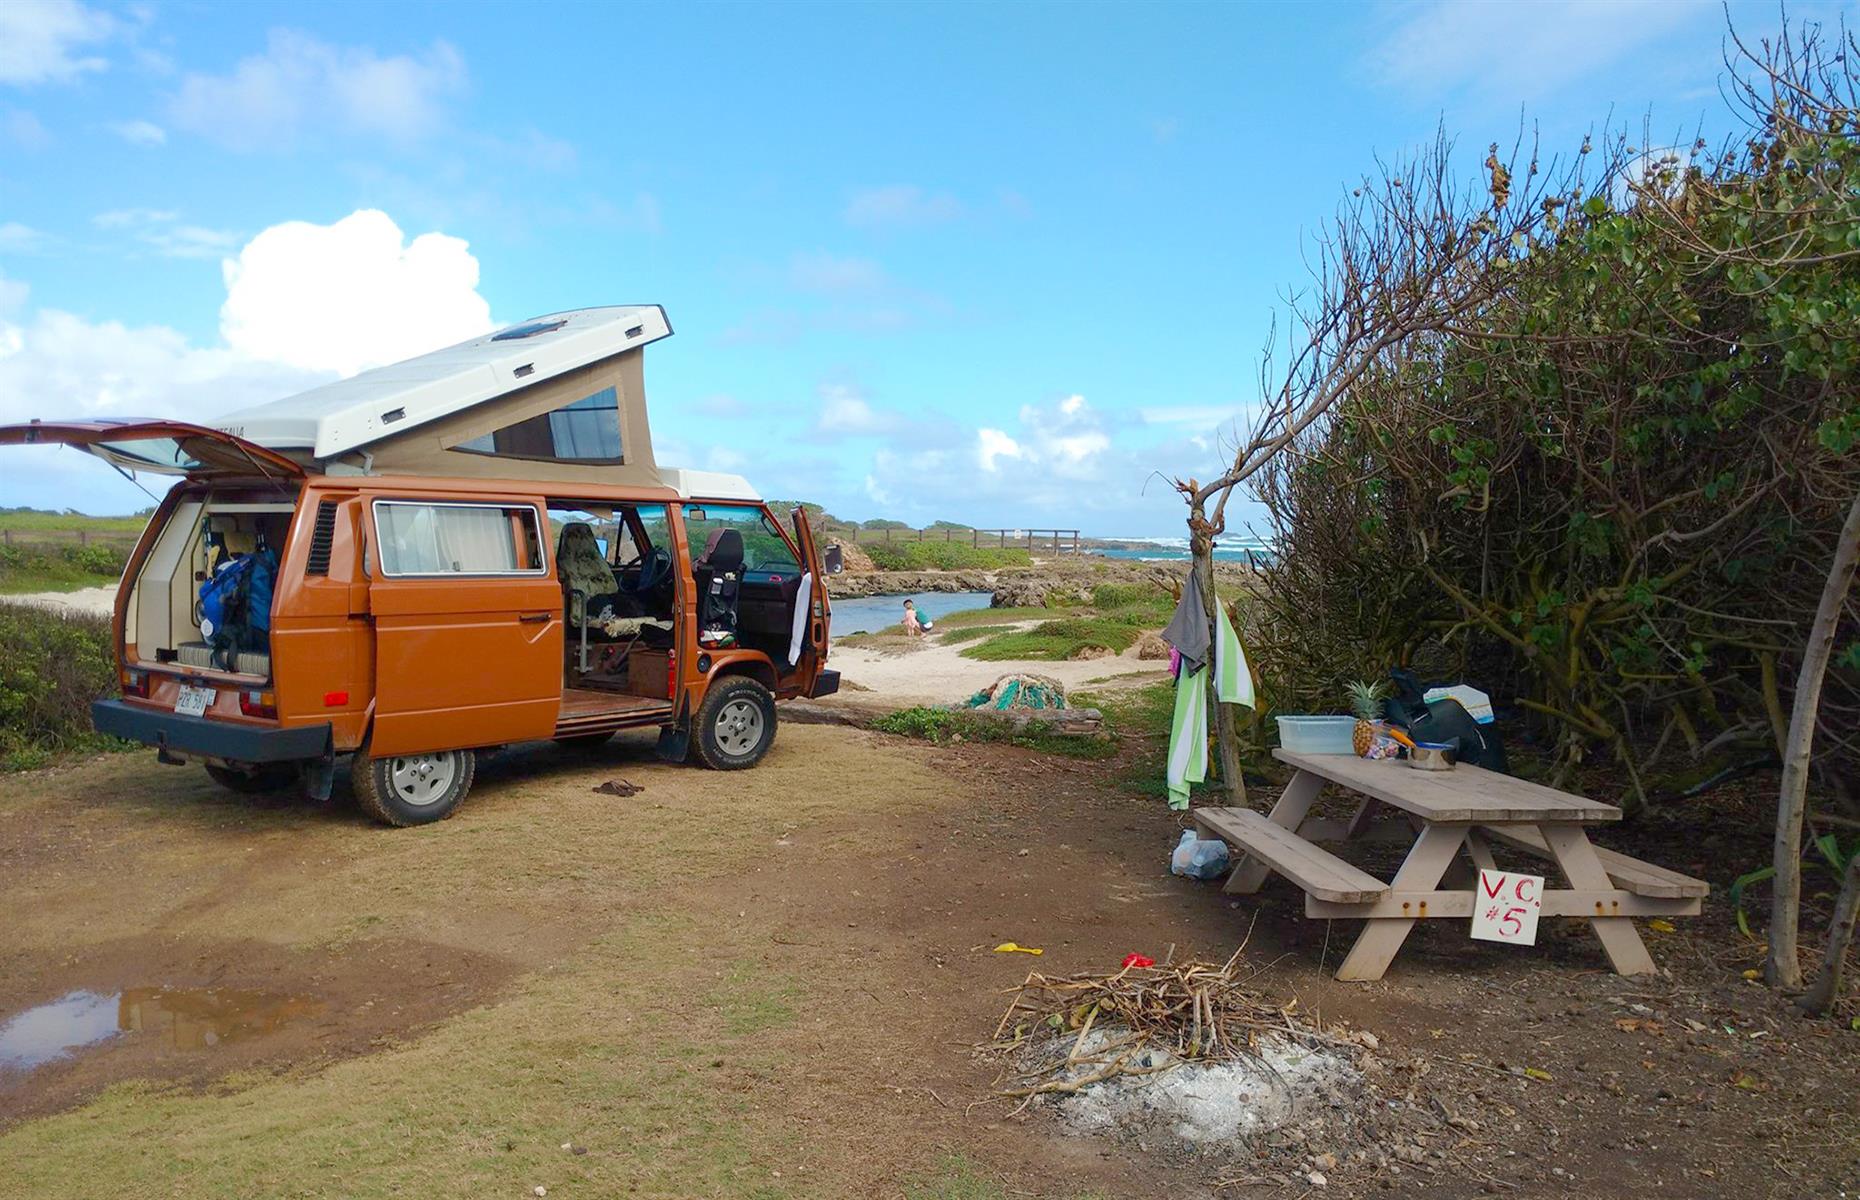 <p>Hitting the open road in Hawaii may sound like a dream – but, in reality, RVing isn't commonplace here, and most campsites, and indeed many roads, aren't geared up for motorhomes. However, there are a few exceptions. One of them is <a href="http://www.malaekahana.net/">Malaekahana Beach Campground</a> in northern Oahu: this idyllic beachfront retreat has several basic, non-electric spaces for vehicles. Once you're parked up, surfing, bodyboard and SUP lessons or rentals are usually available – <a href="https://www.malaekahana.net/north-shore-hawaii-surfboard-sup-rentals/ocean-activities-rentals">check the website</a> for details. </p>